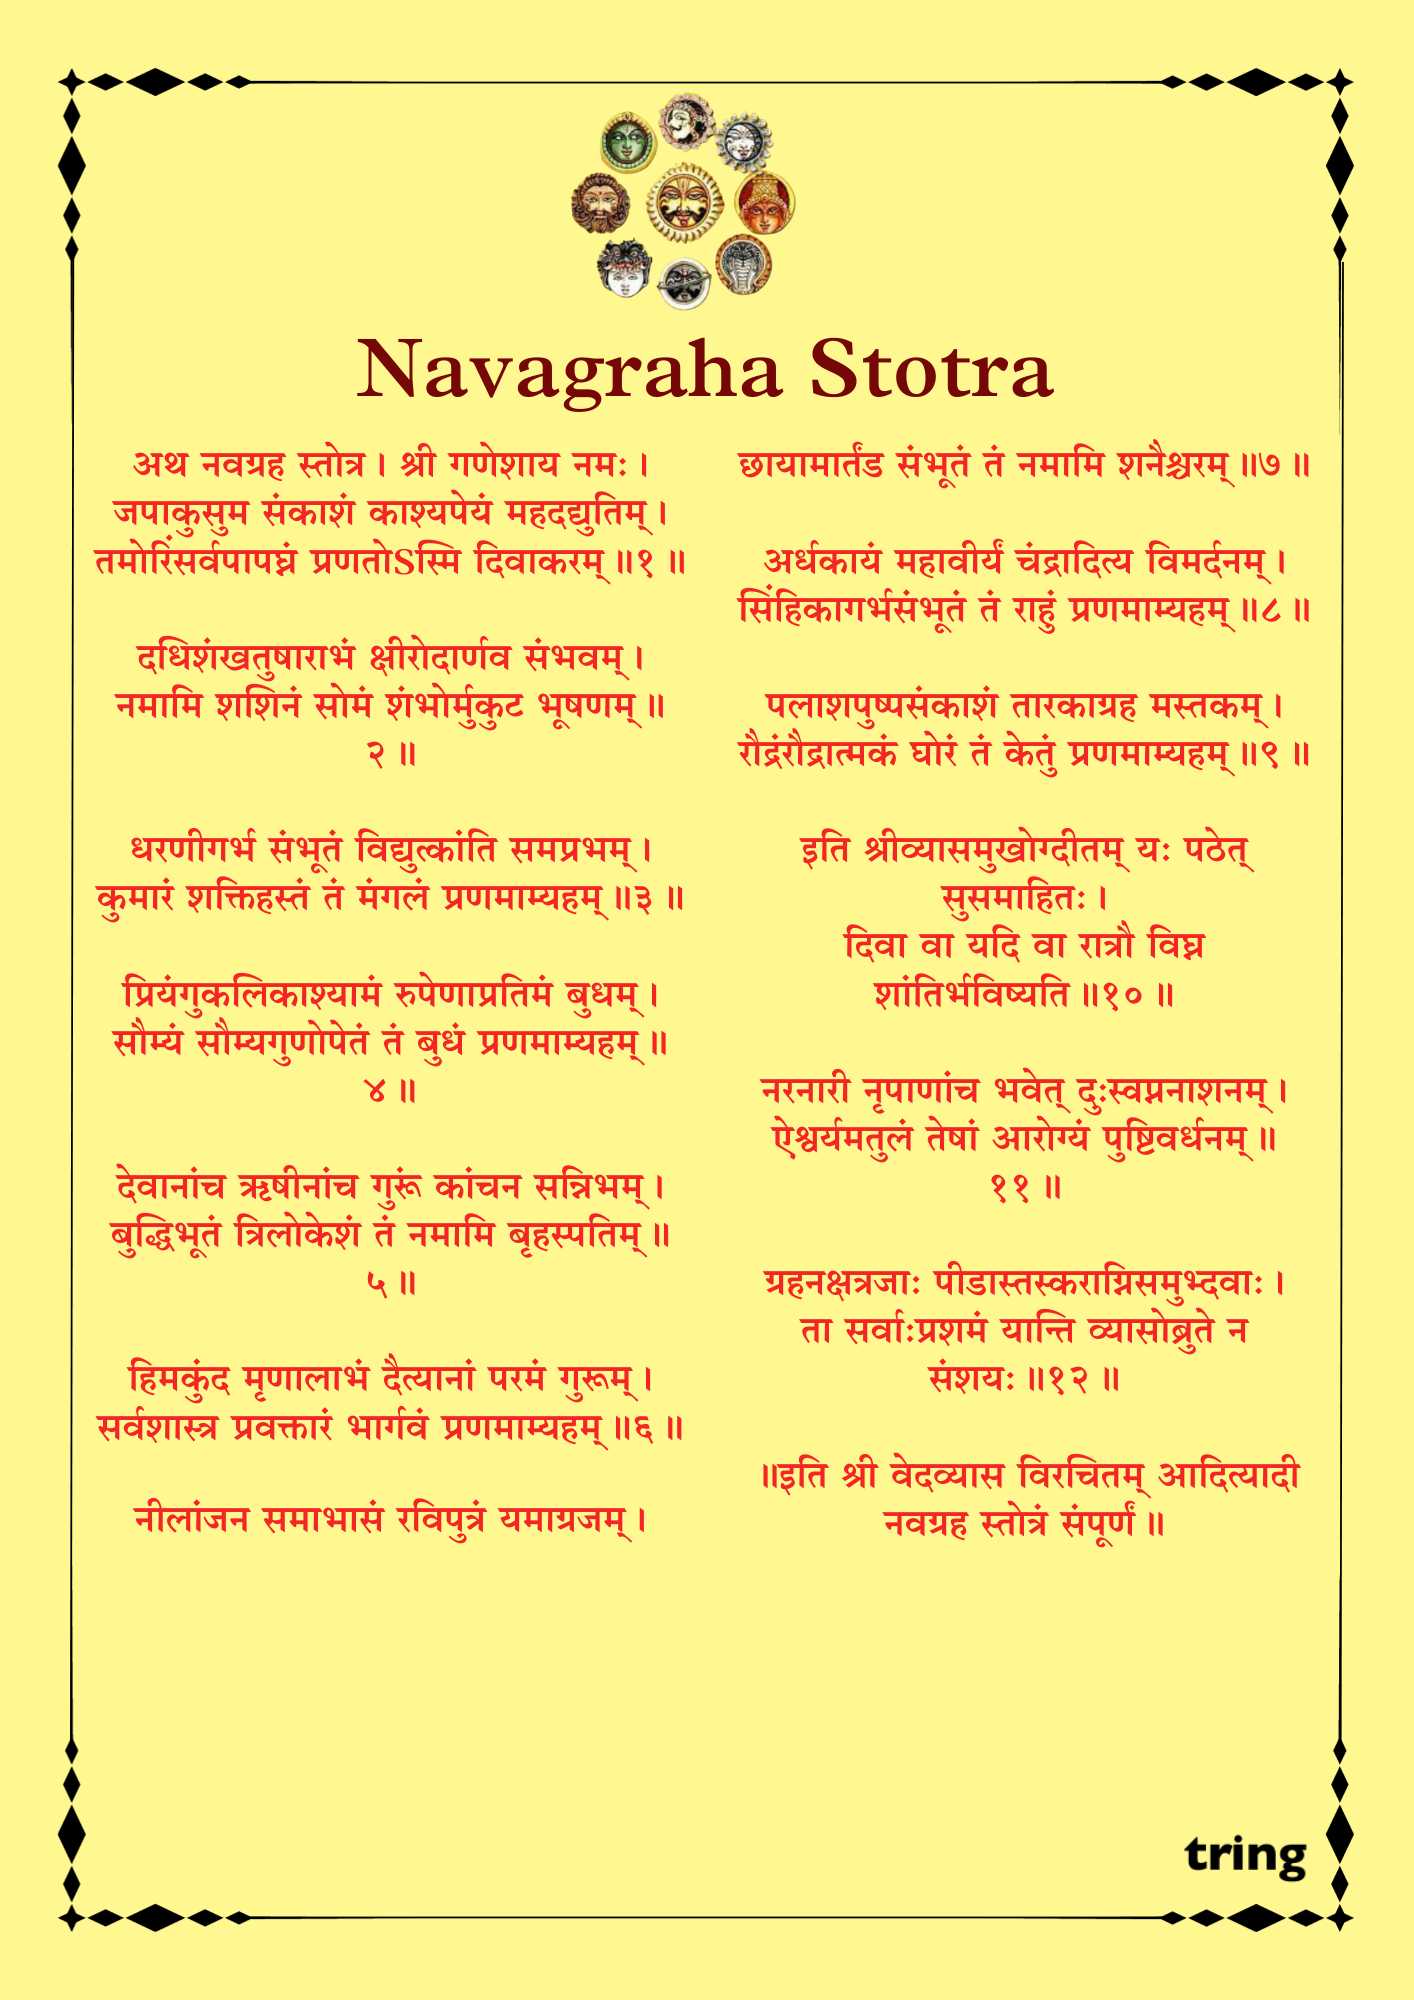 Navagraha Stotra Images